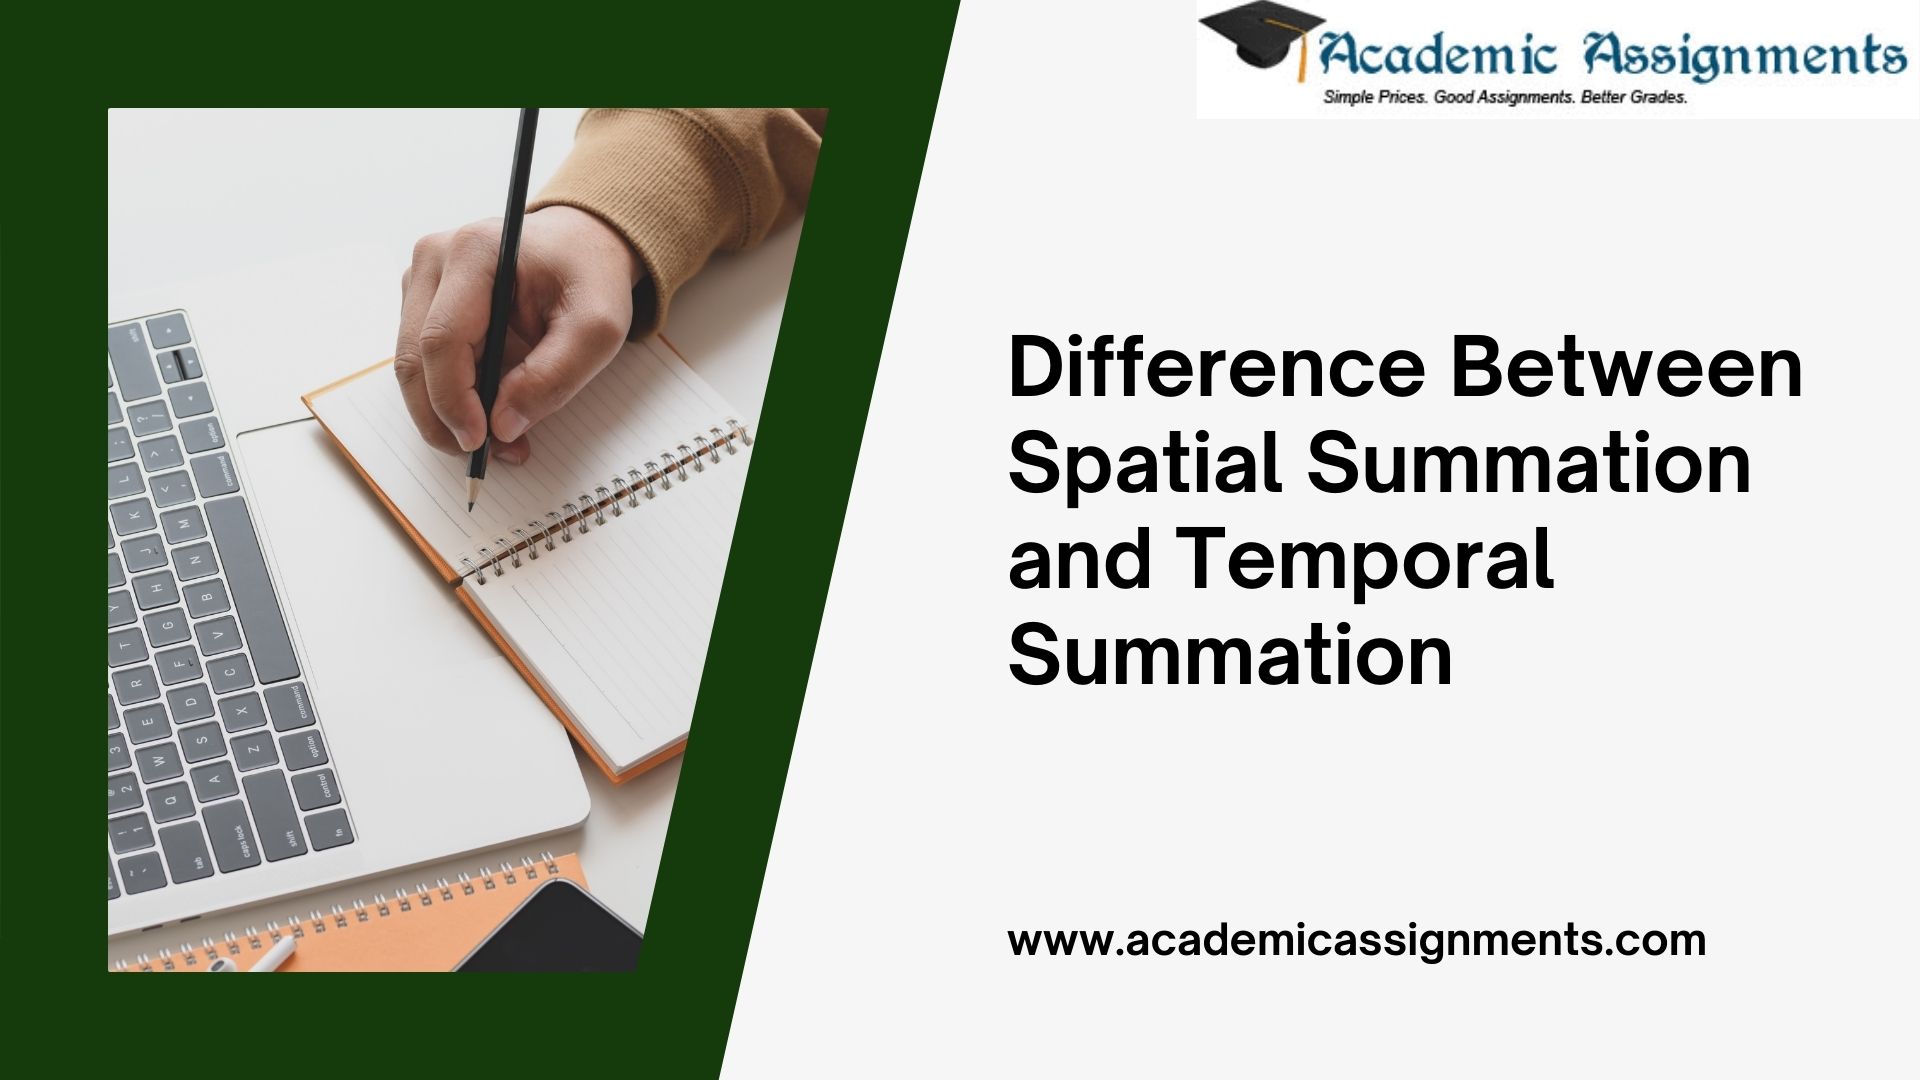 Difference Between Spatial Summation and Temporal Summation